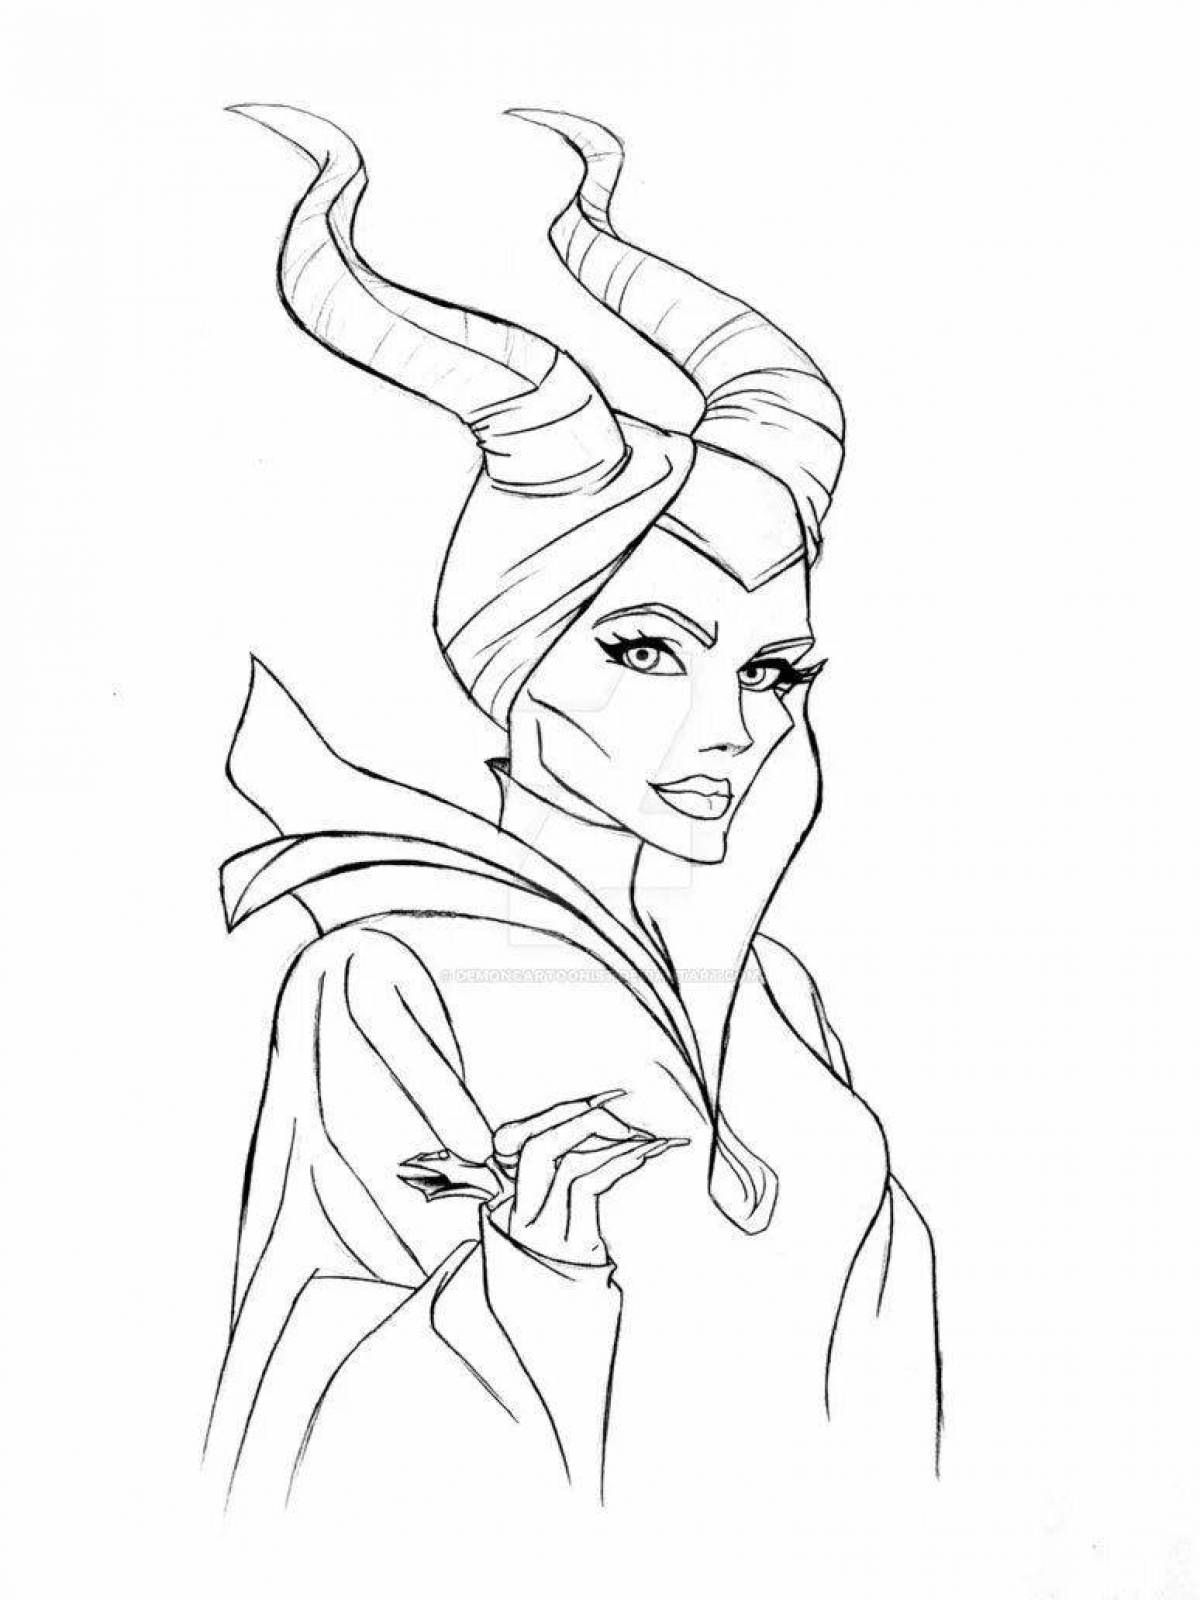 Maleficent magic coloring for kids